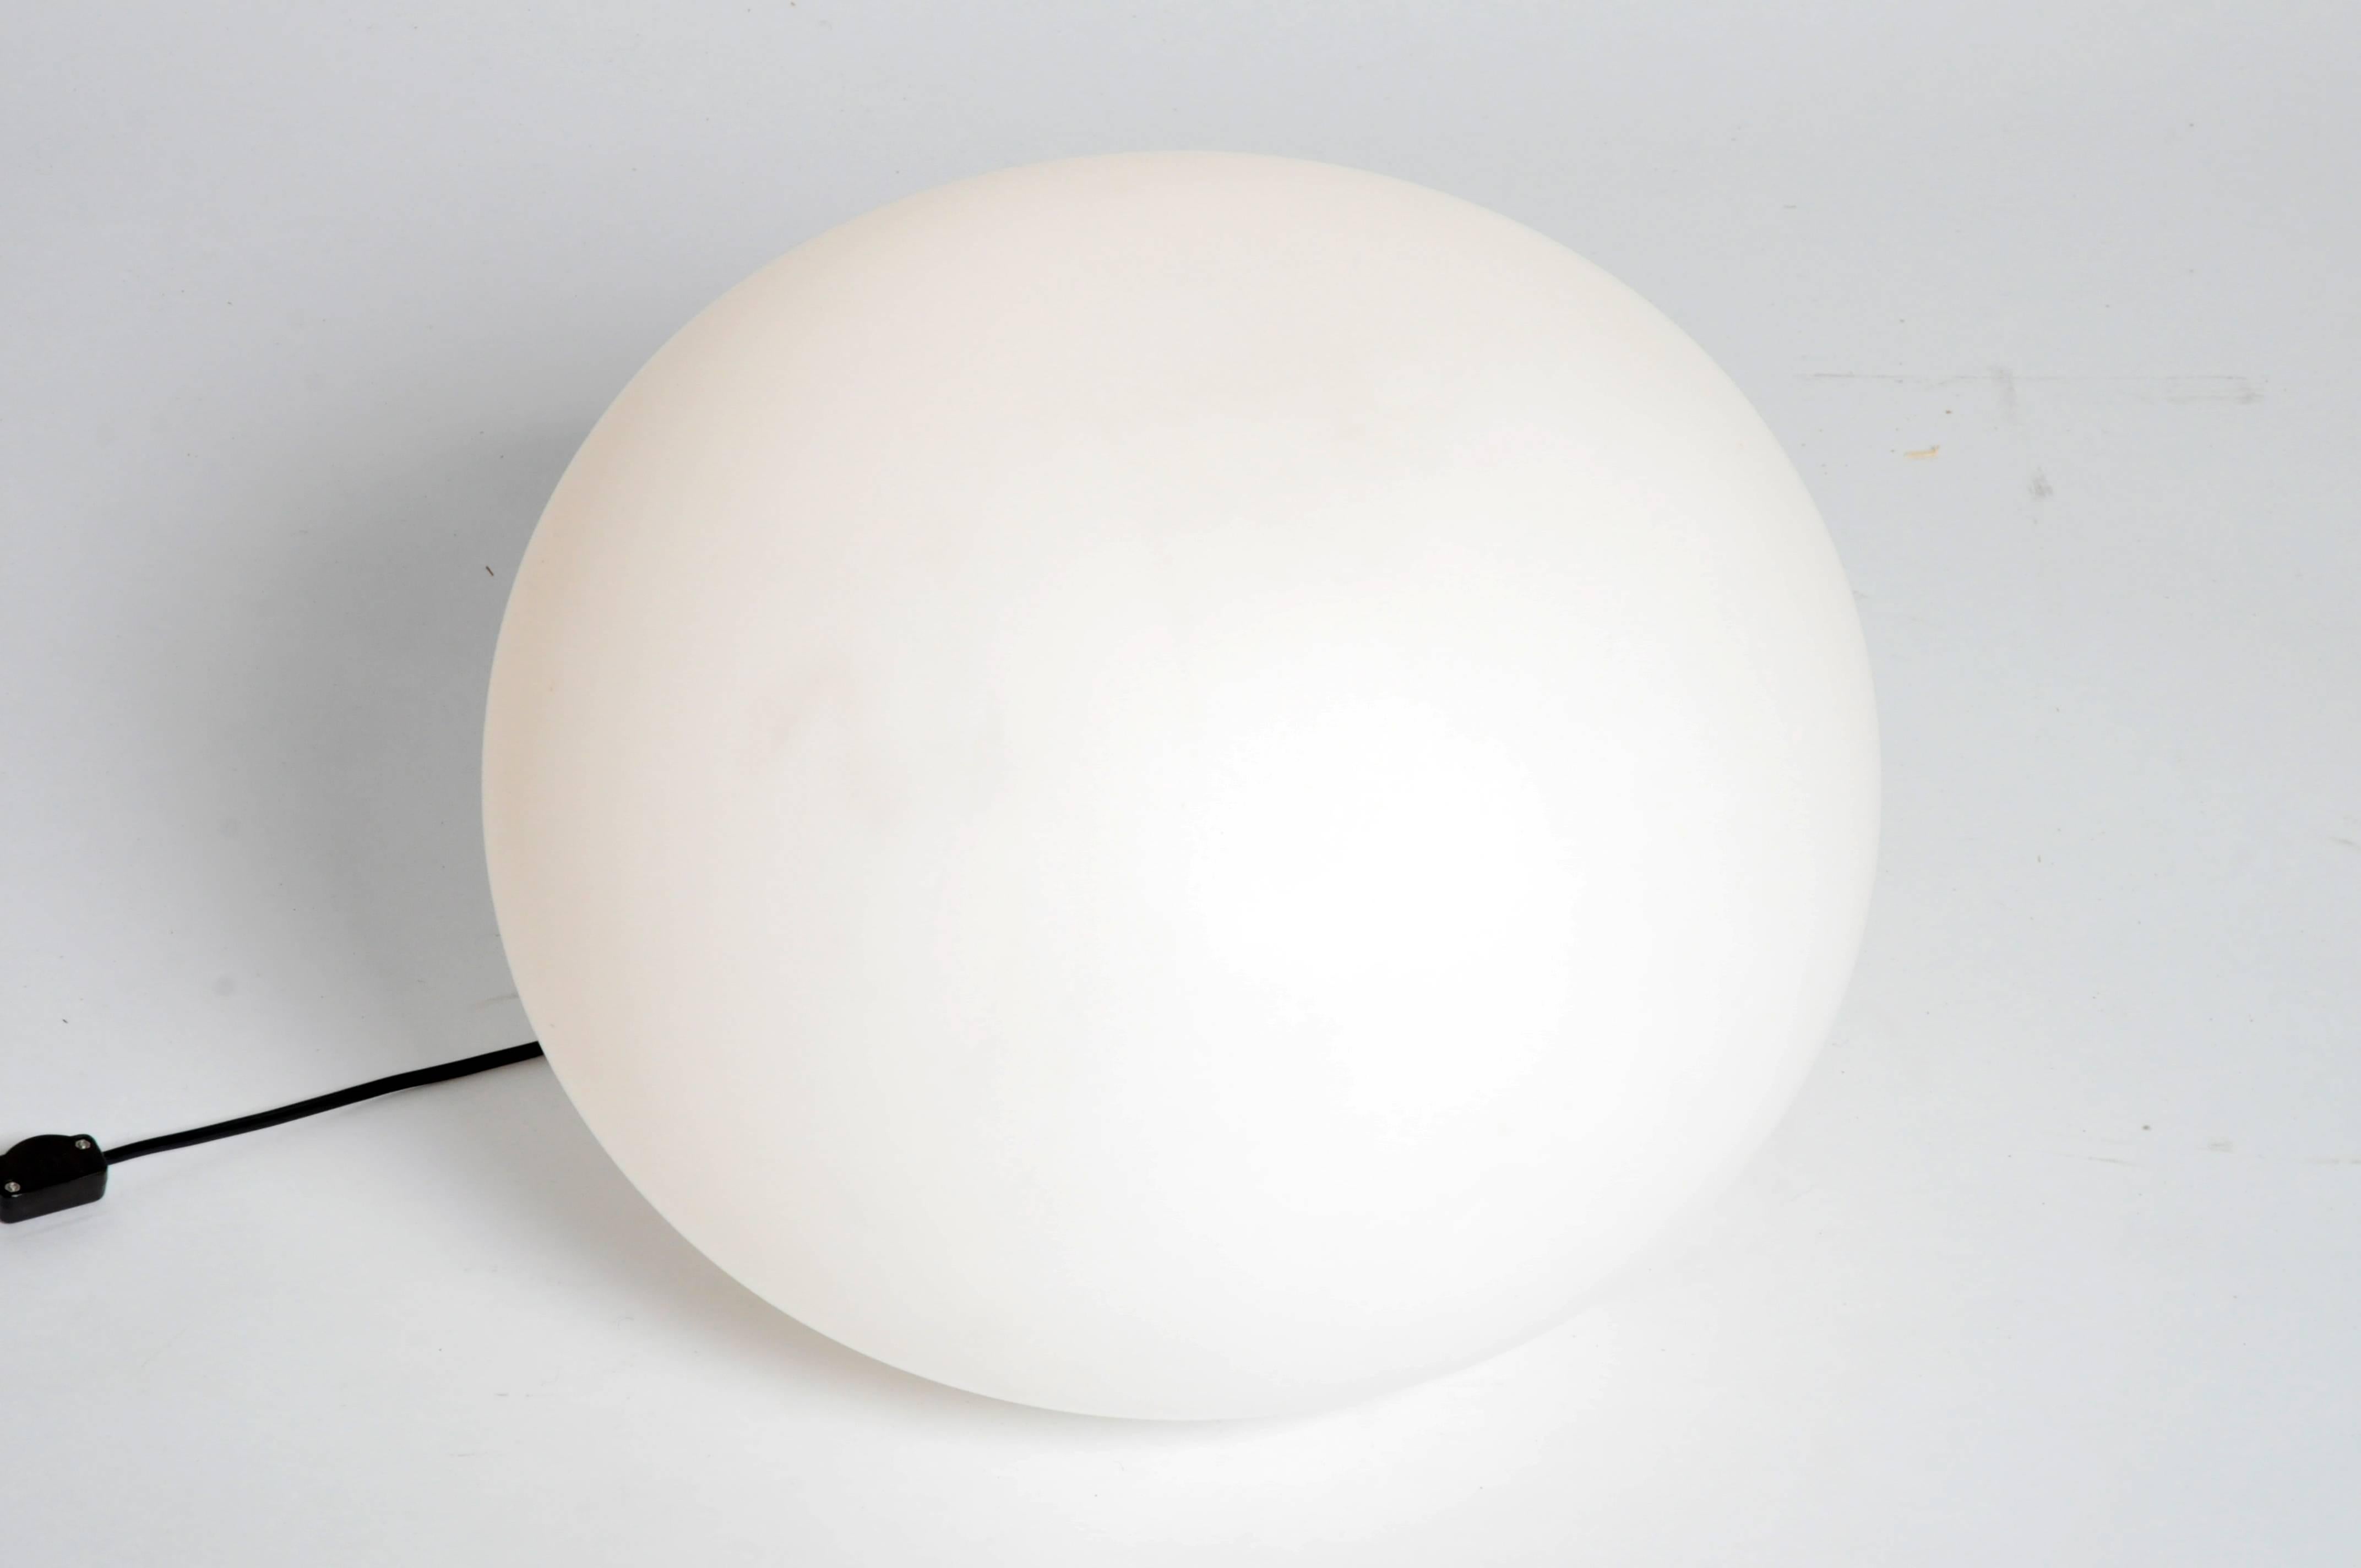 Made from handblown opaline glass these lights are expertly crafted and emit a soft nebulous glow. The gently compressed globes are secured to circular white metal bases. Chic additions to any modern interior, we also think they look exquisite on a